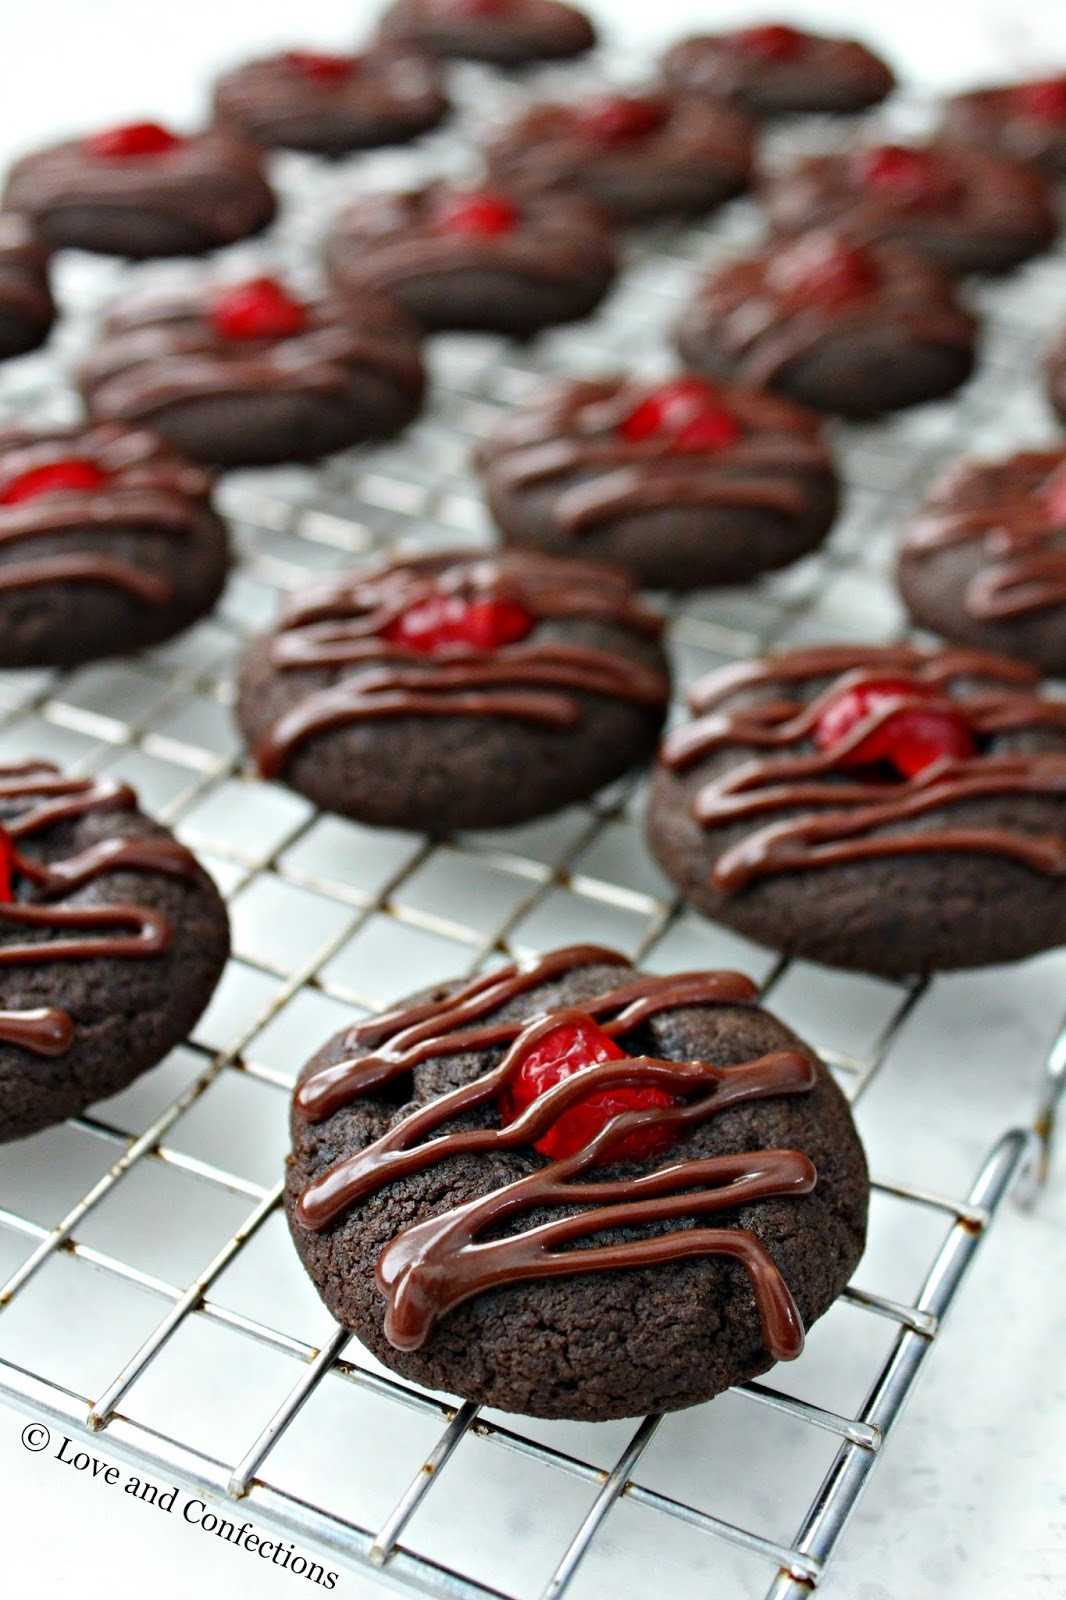 The Most Satisfying Chocolate Covered Cookies